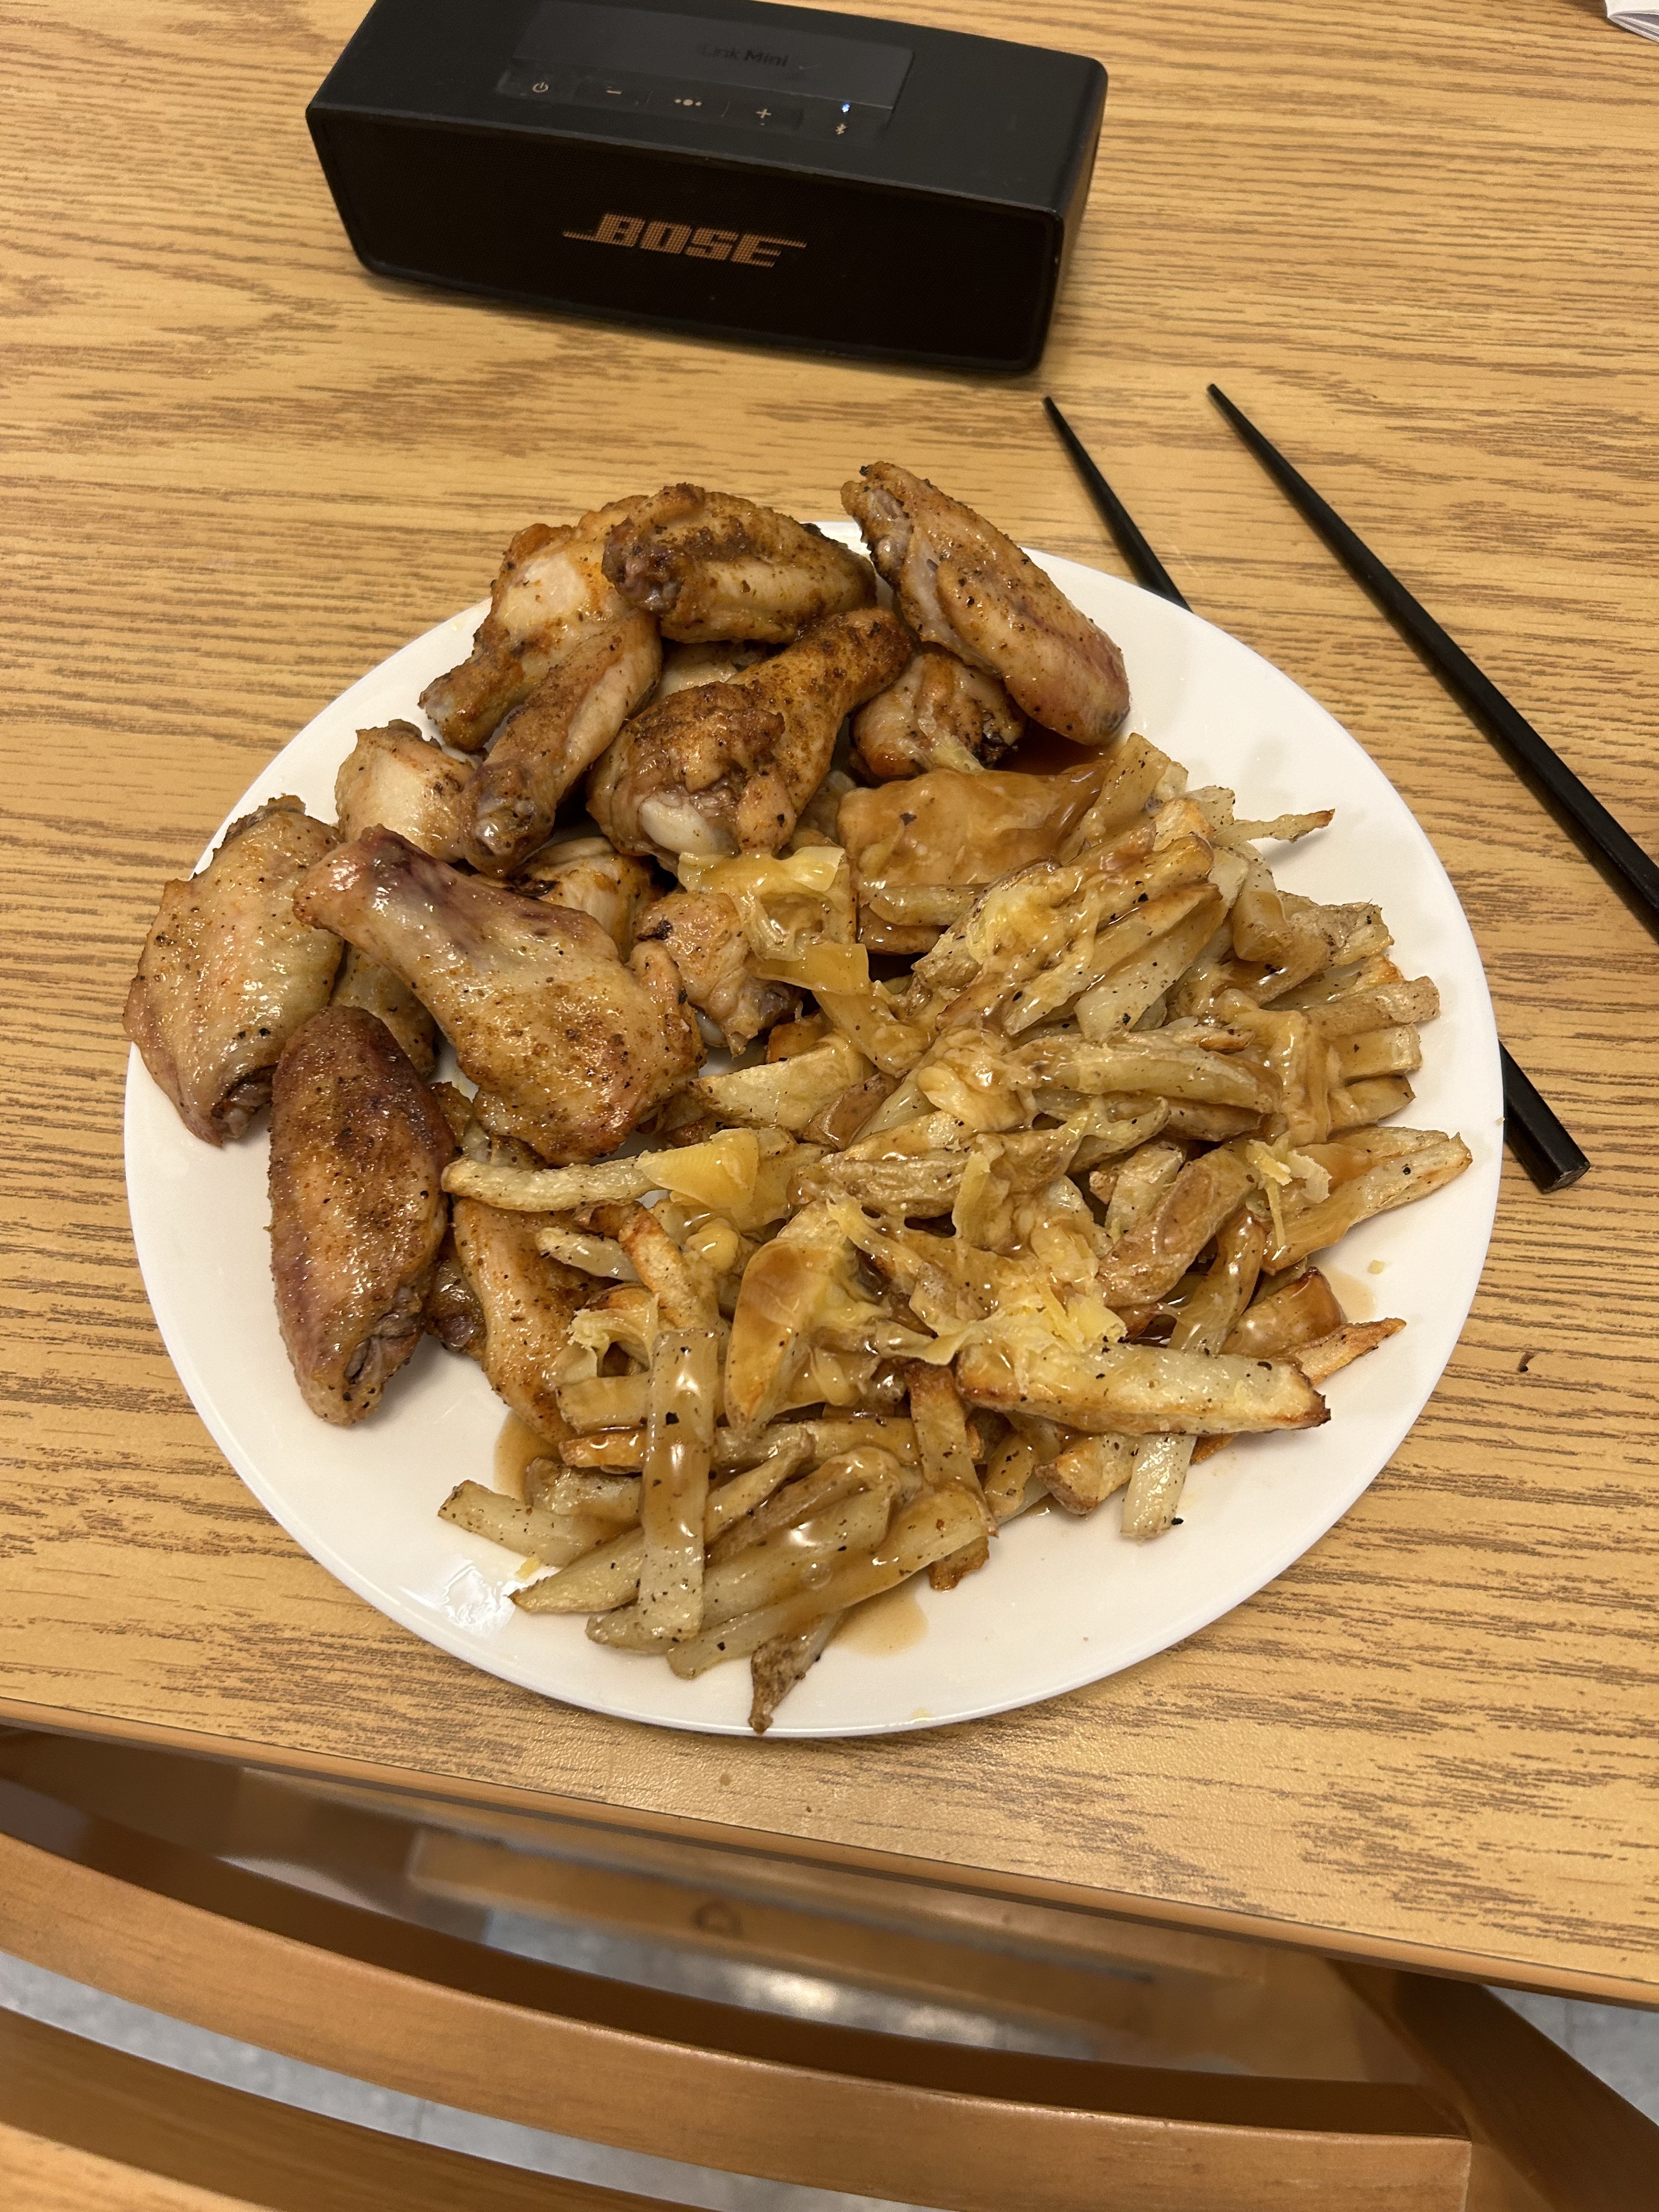 Chicken wings and poutine, all from scratch.